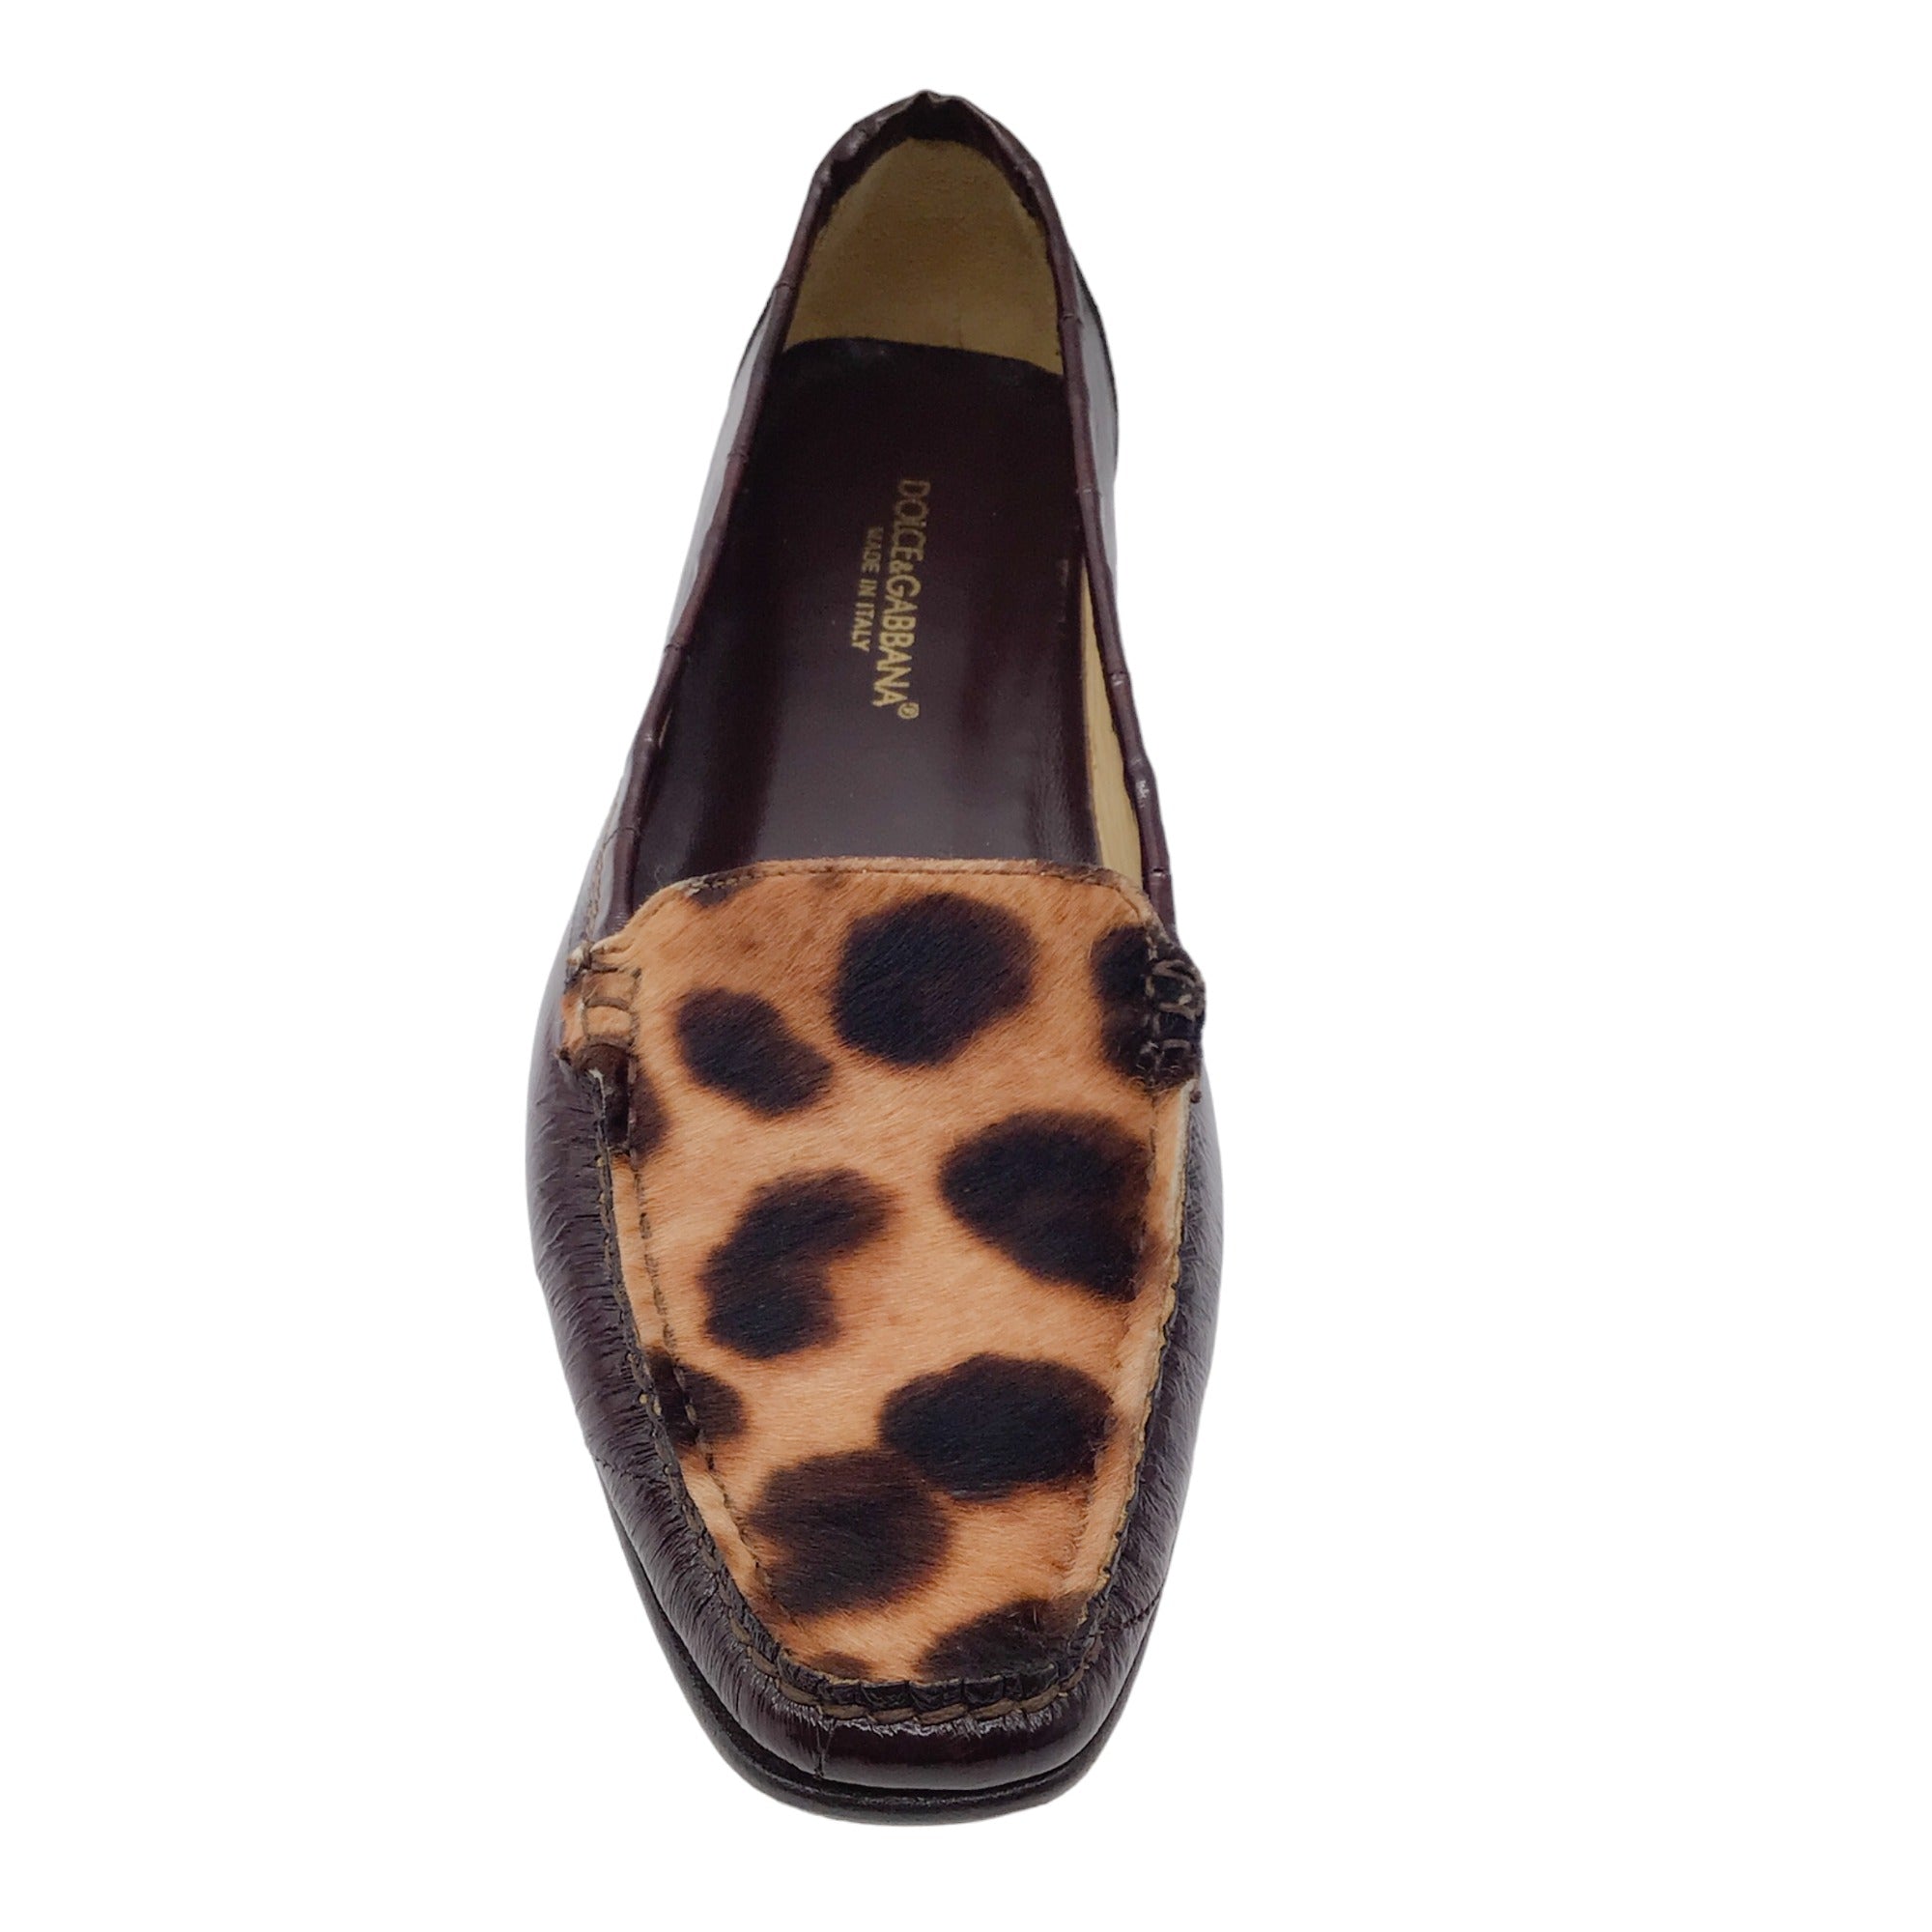 Dolce & Gabbana Brown Leopard Printed Calf Hair and Patent Leather Loafers / Flats